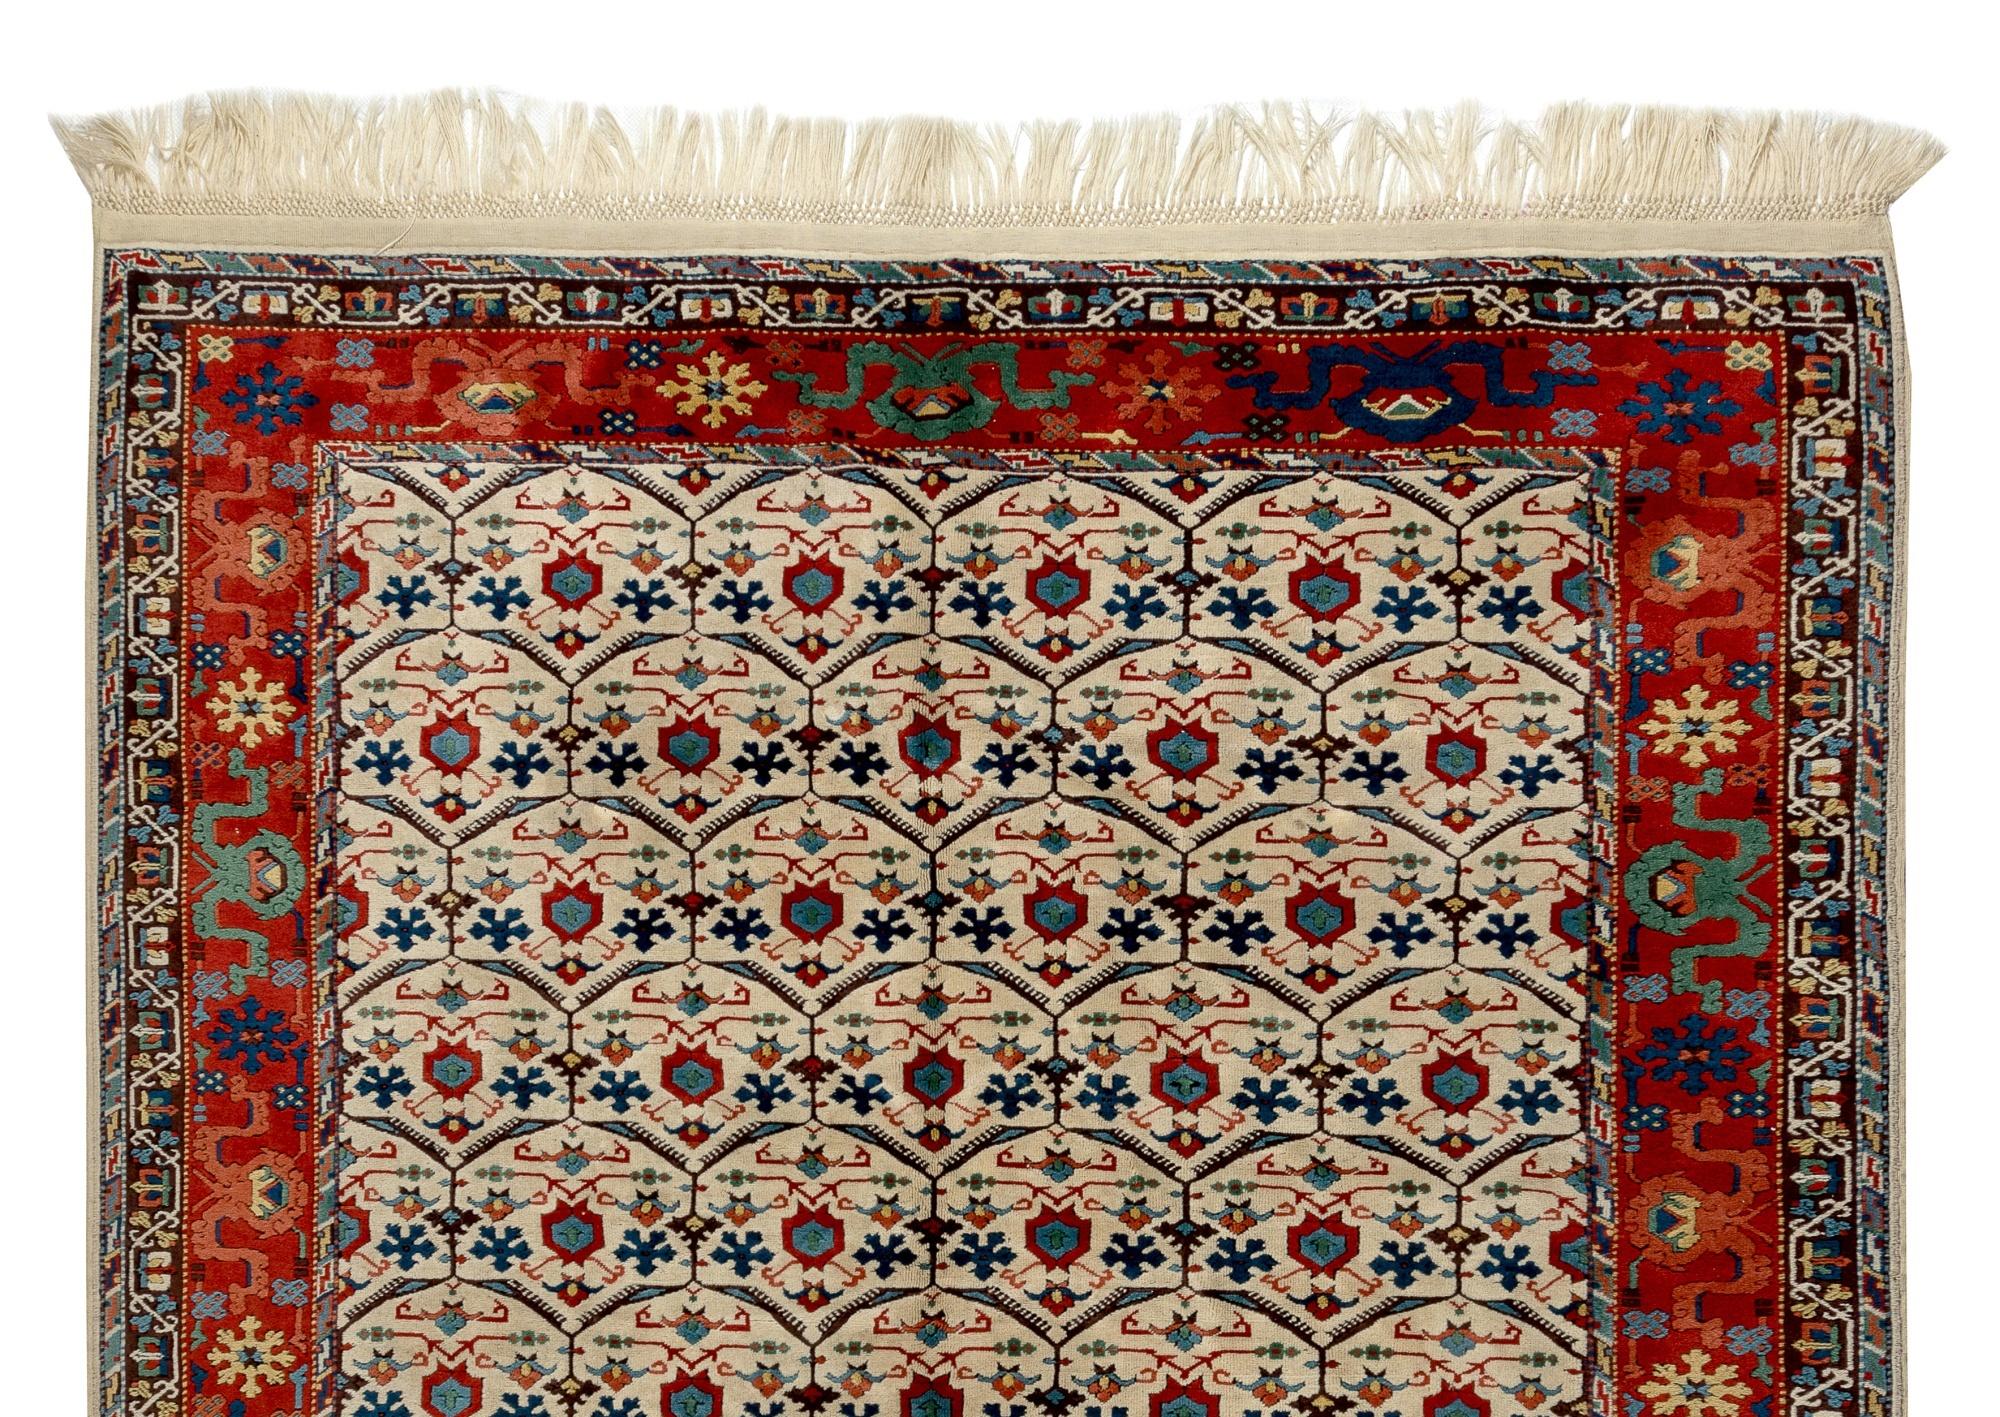 A fine Turkish area rug and 100% natural dyed wool.
Finely hand-knotted with even medium wool pile on wool foundation. Sturdy and can be used in a high traffic area, suitable for both residential and commercial interiors. Measures: 7 x 9 Ft.